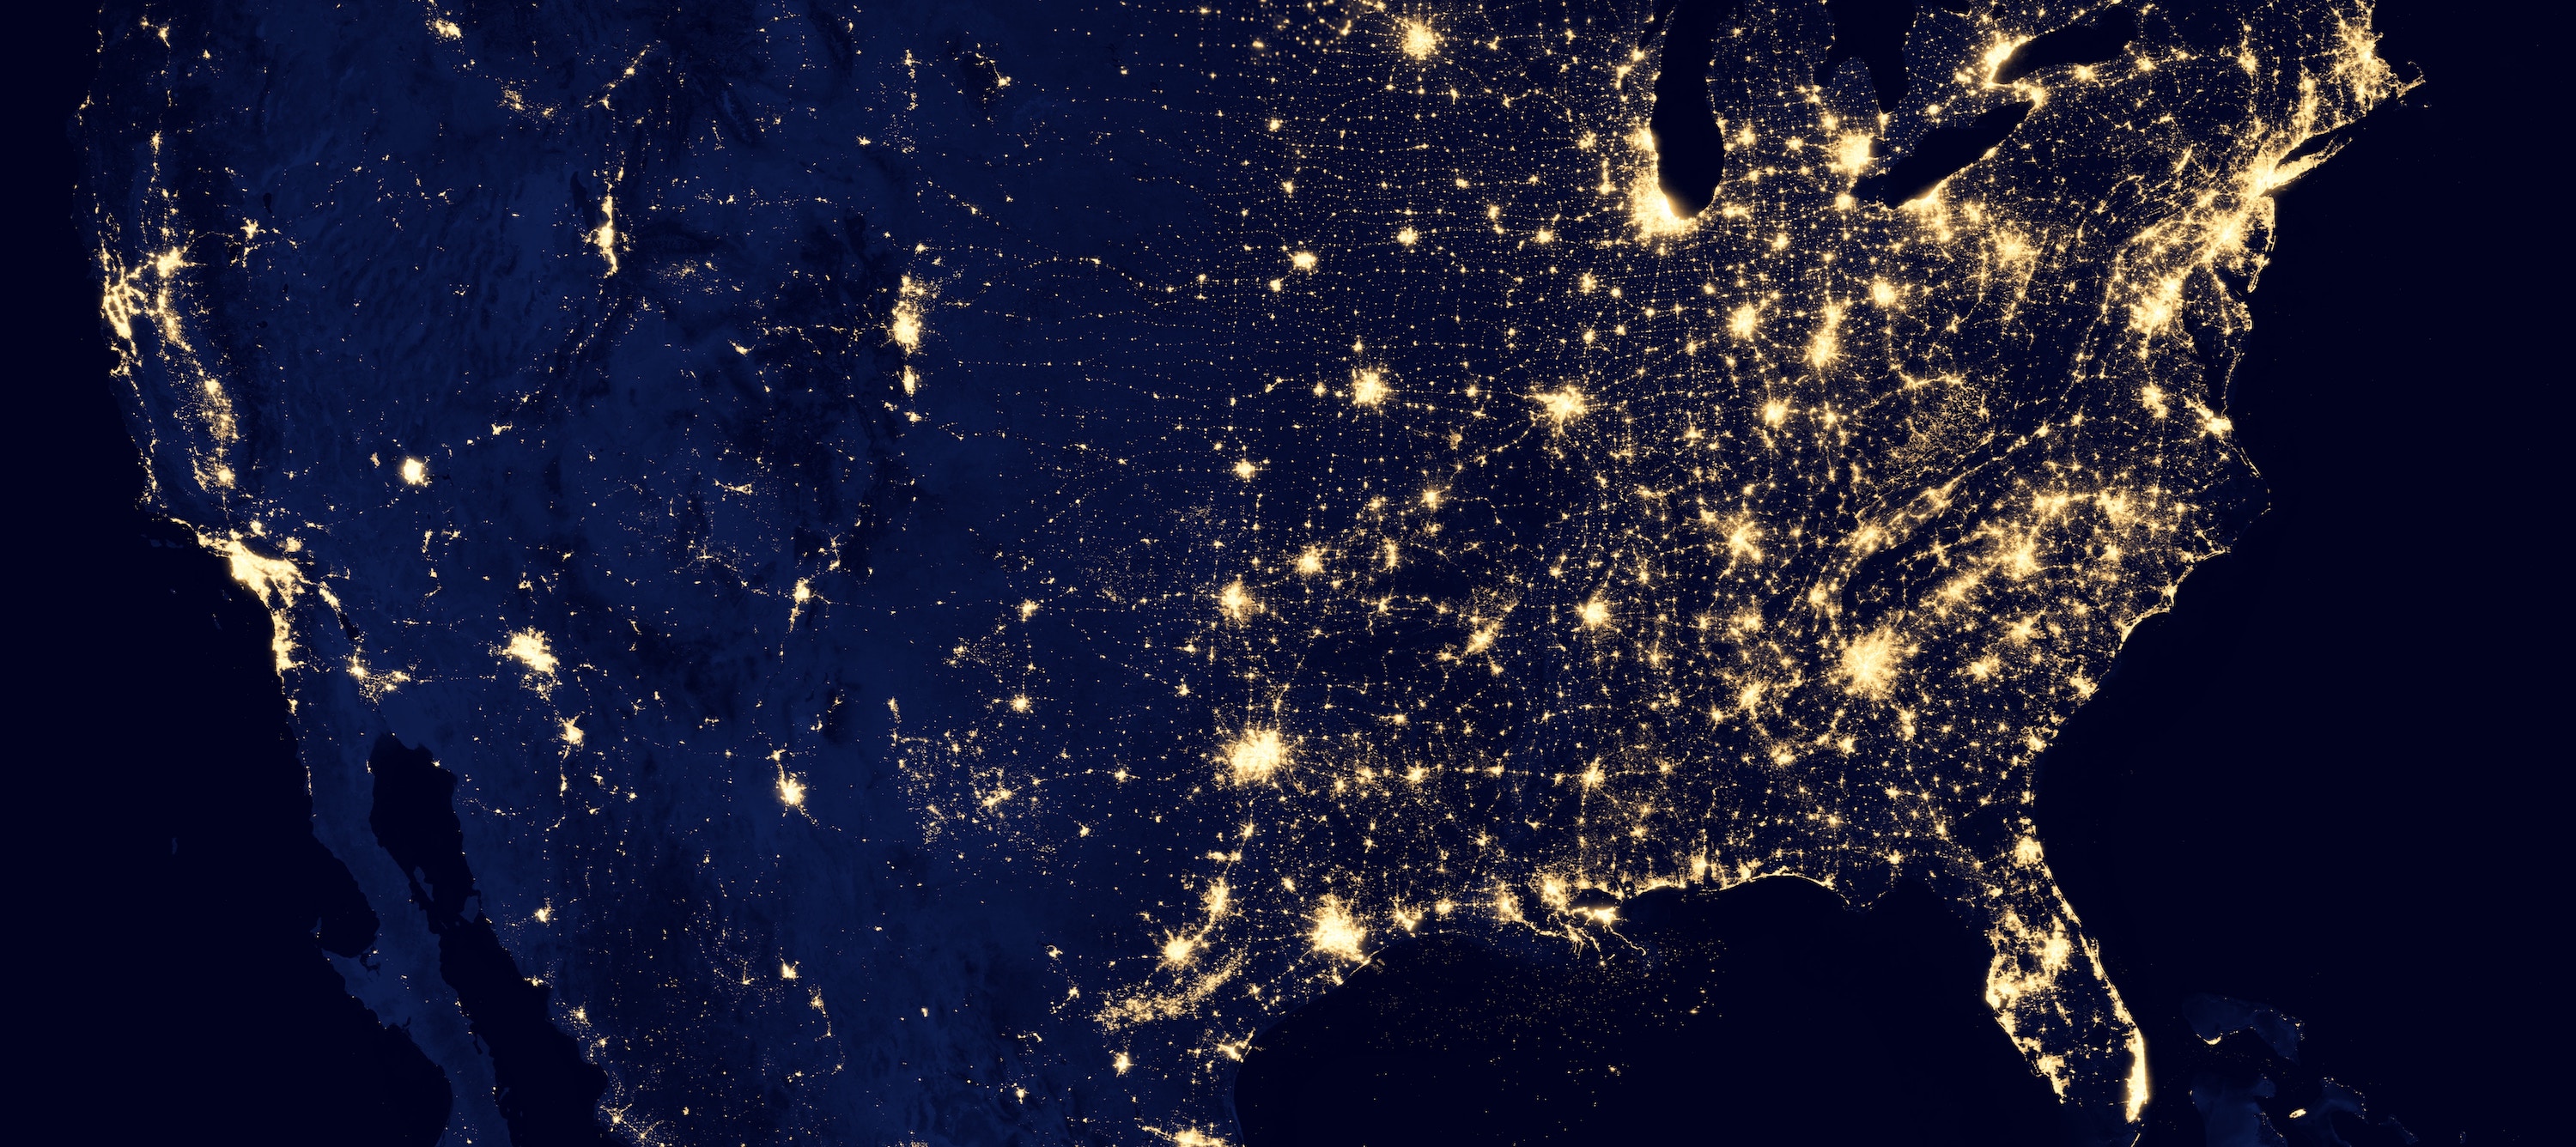 United States at night as seen from space